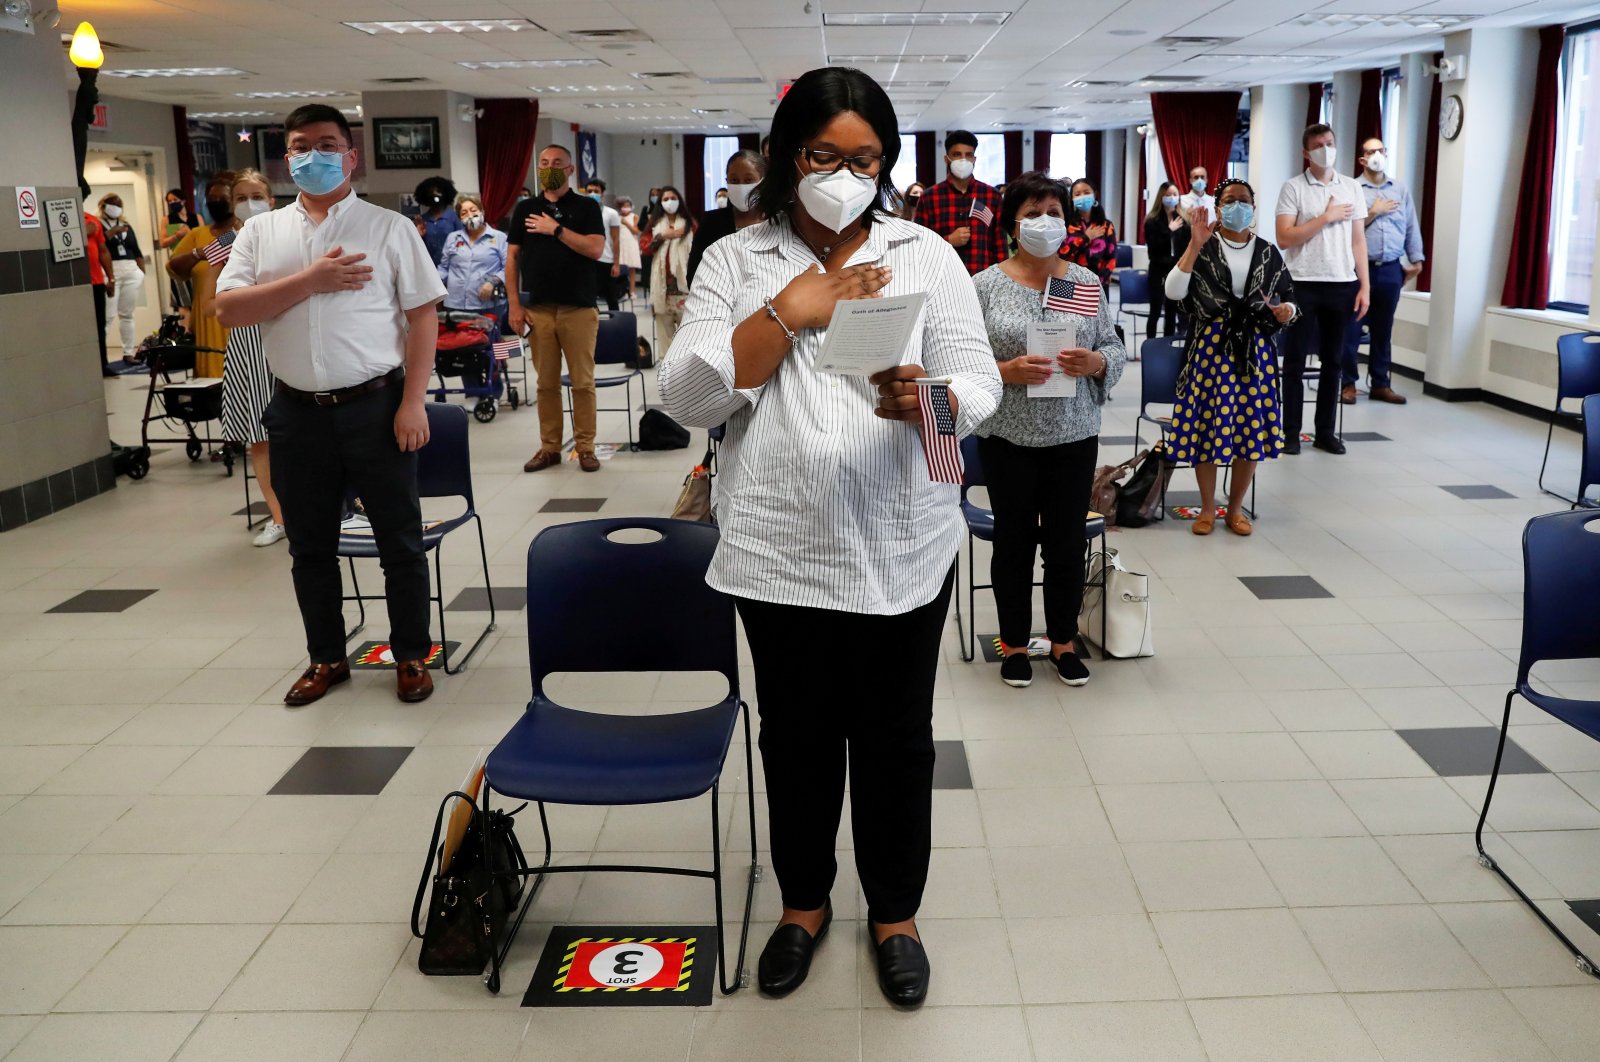 Ifeoma Eh, a citizen candidate from Nigeria, stands with others socially distanced and wearing protective face masks, as the outbreak of the coronavirus disease (COVID-19) continues, during a U.S. Citizenship and Immigration Services (USCIS) naturalization ceremony in New York, U.S., July 22, 2020. (Reuters Photo)